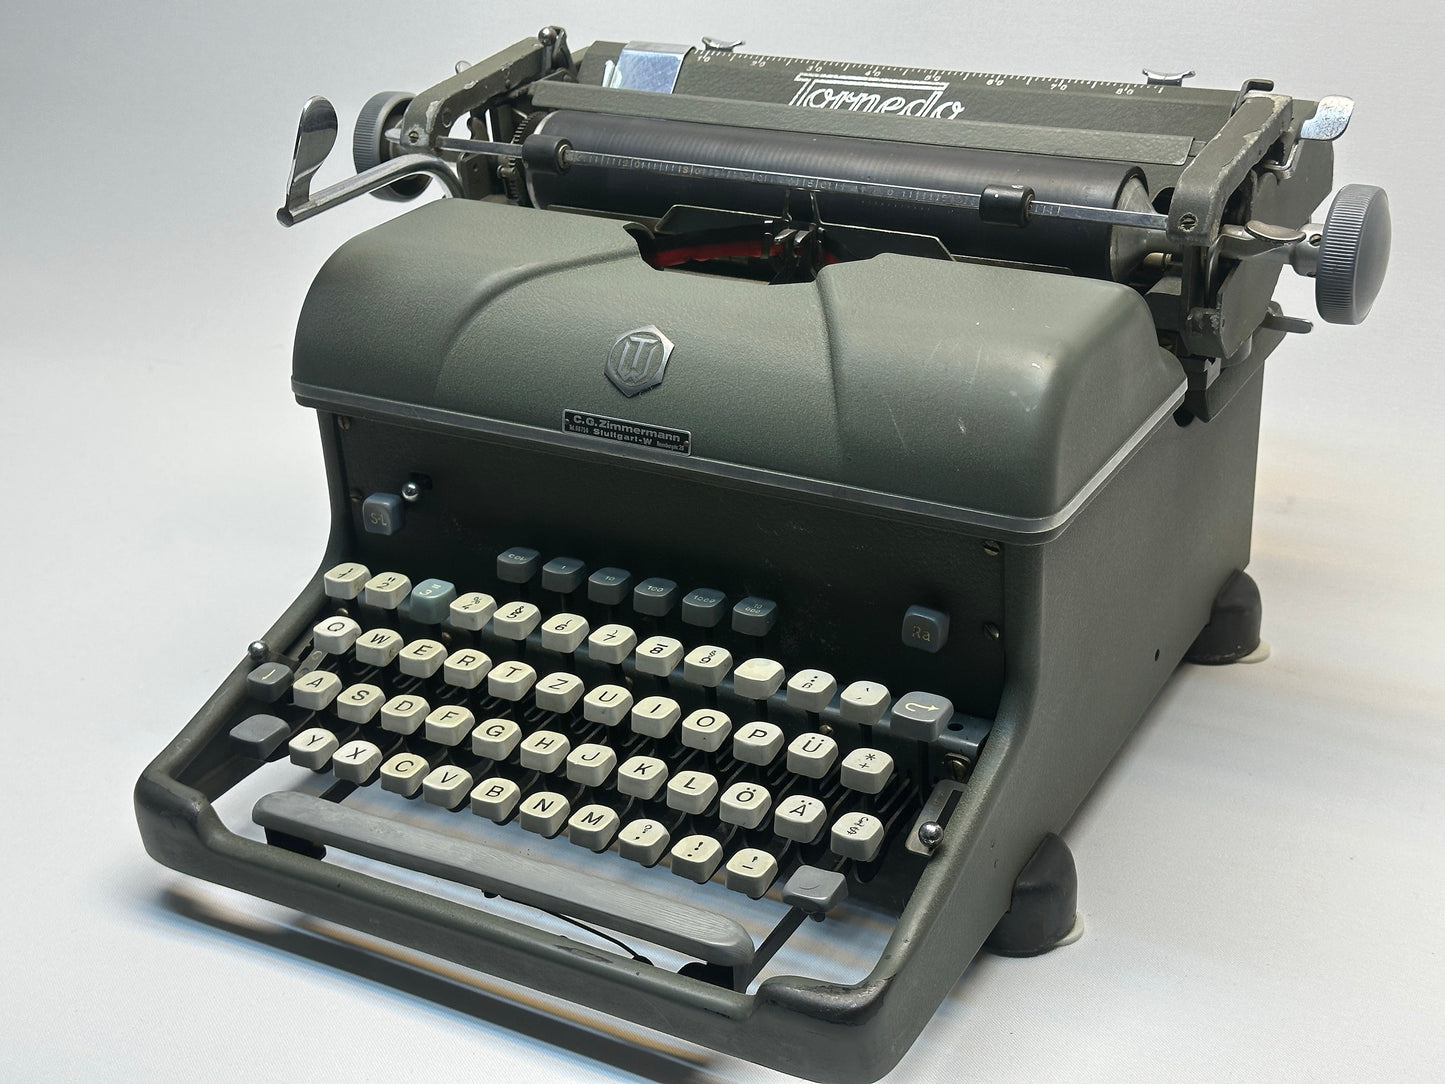 Great gift! Torpedo Typewriter - The Classic Giant of Typewriters, Unmatched Quality and Performance